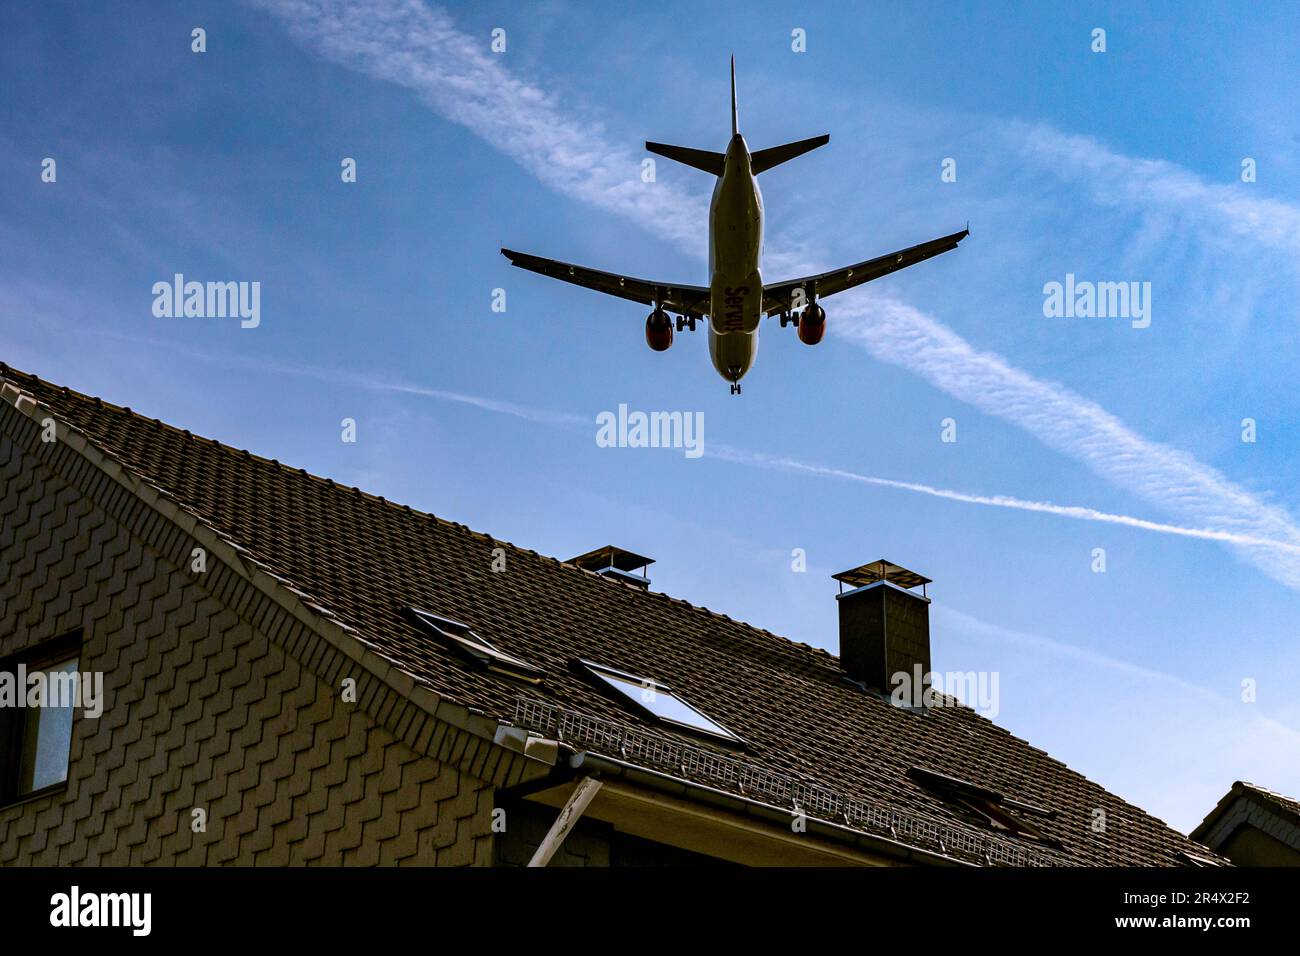 Entry lane over residential areas at Düsseldorf Airport Stock Photo